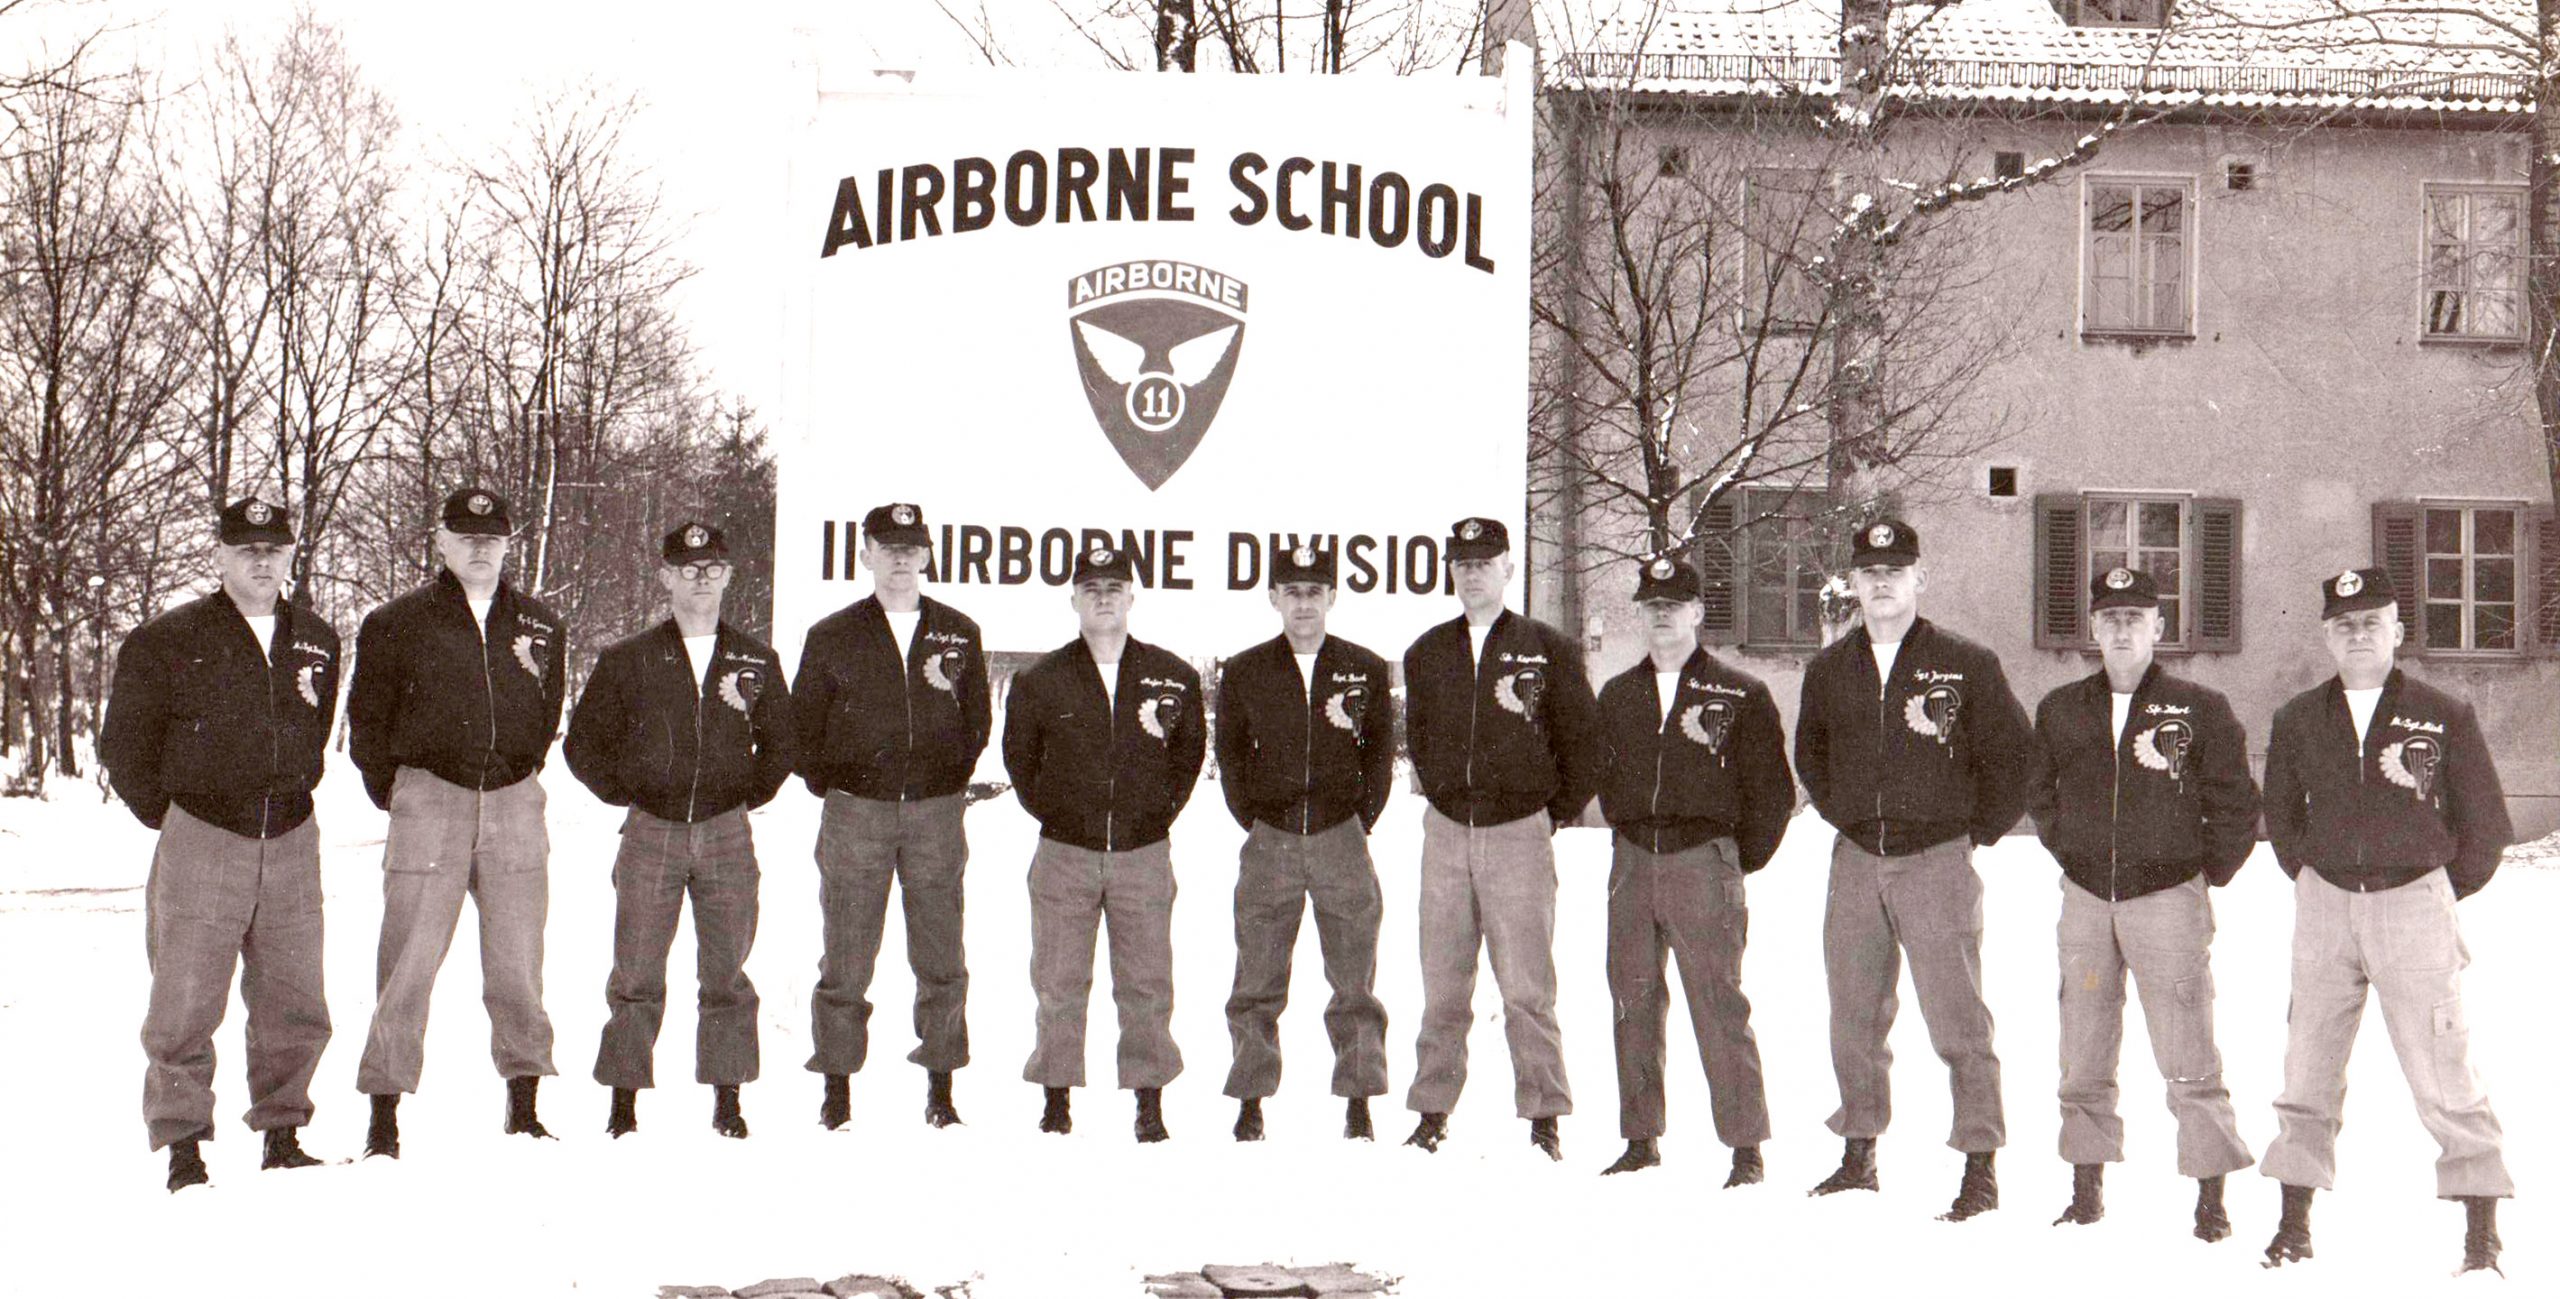 About The 11th Airborne Division Association 11th Airborne Division